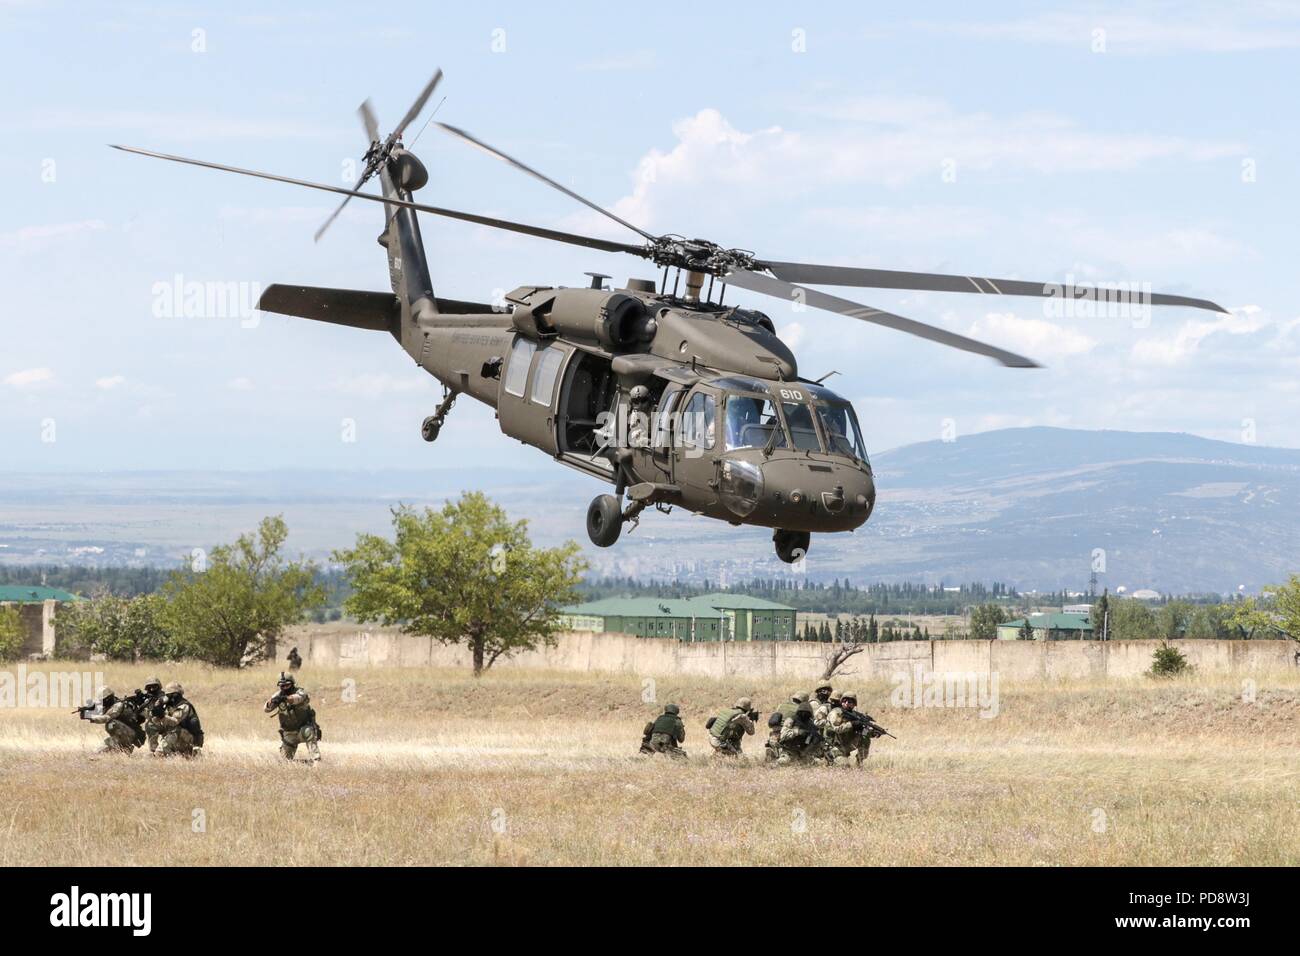 A Georgia Army National Guard UH-60 Black Hawk from the Marietta based, 1st Battalion, 171st Aviation Regiment, lifts off rapidly after inserting Georgian special forces during an urban operations exercise at the Vaziani Training Area on Aug 5, 2018 during Noble Partner 18, August 5, 2018. The exercise highlights the 24 years the two militaries have worked together under the U.S. National Guard's State Partnership Program. U.S Army photo by Staff Sgt. R. J. Lannom Jr. () Stock Photo